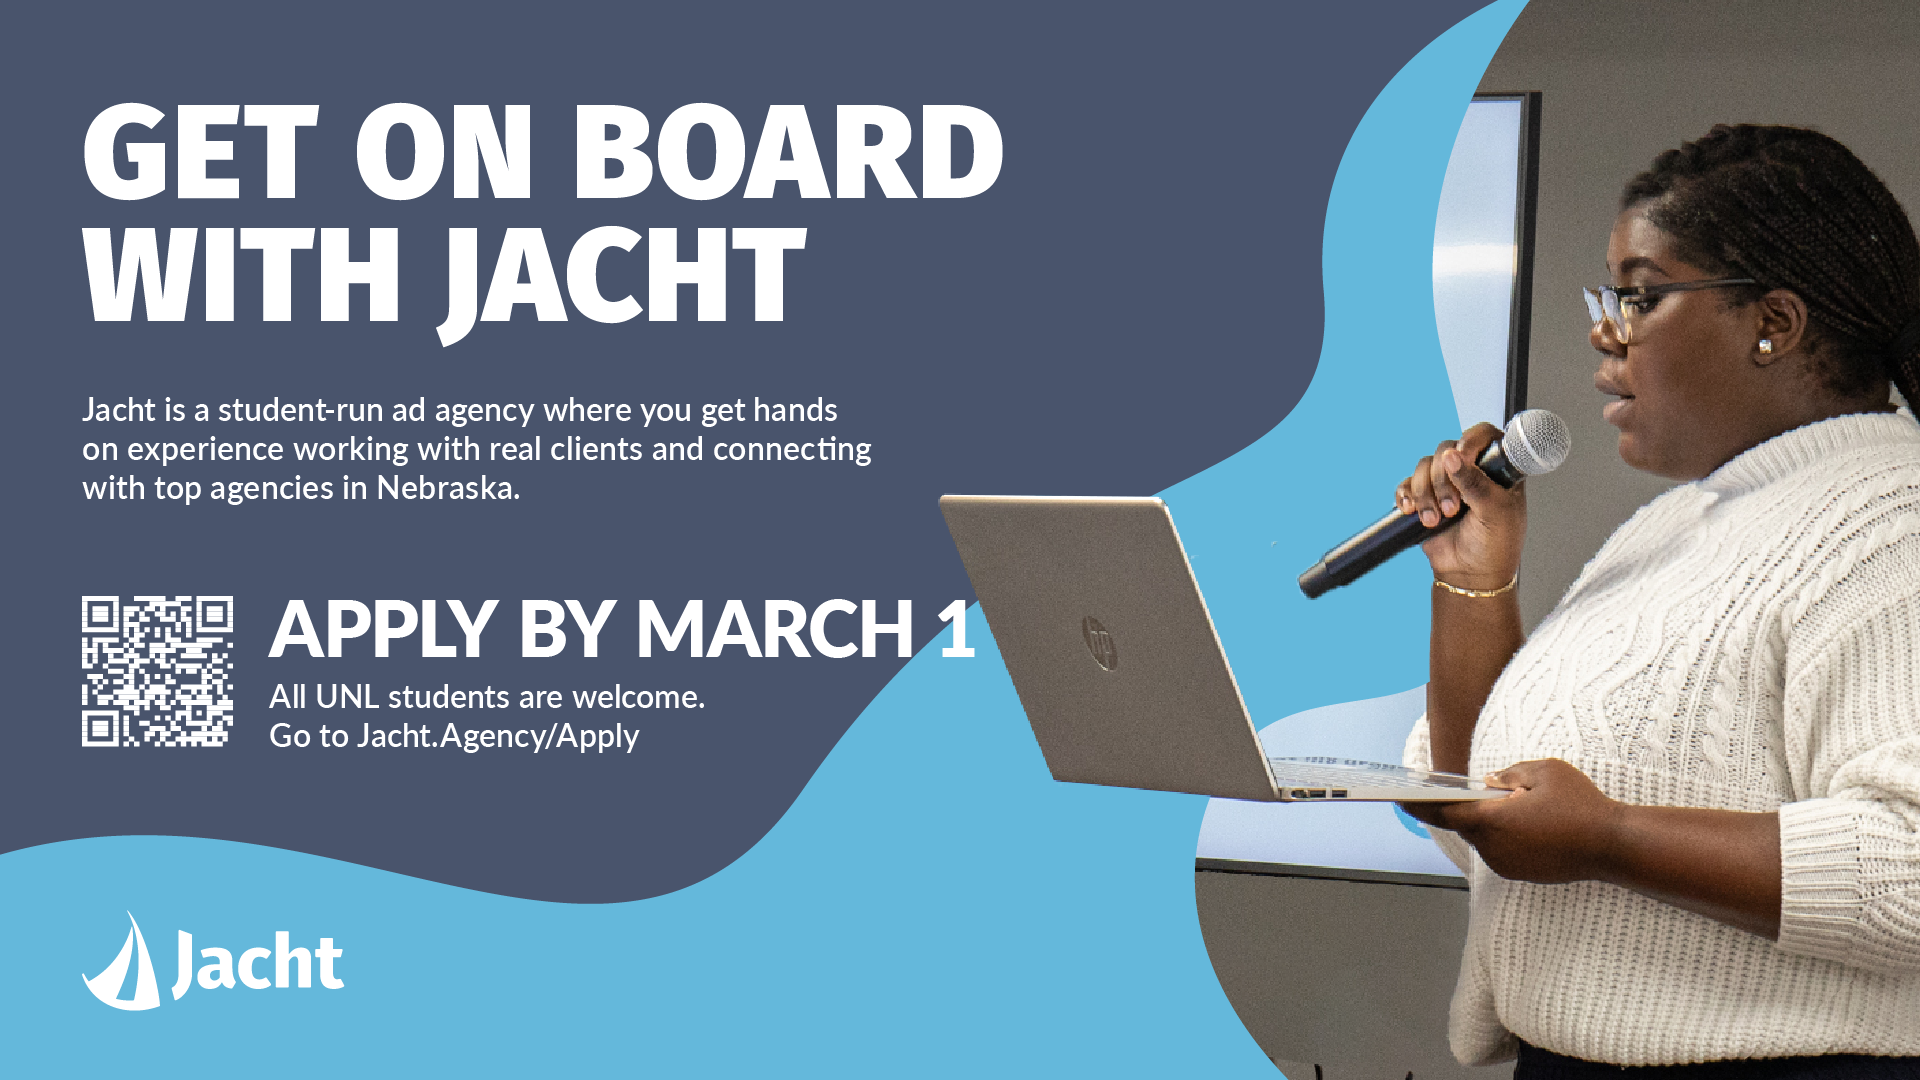 Get Onboard with Jacht Club